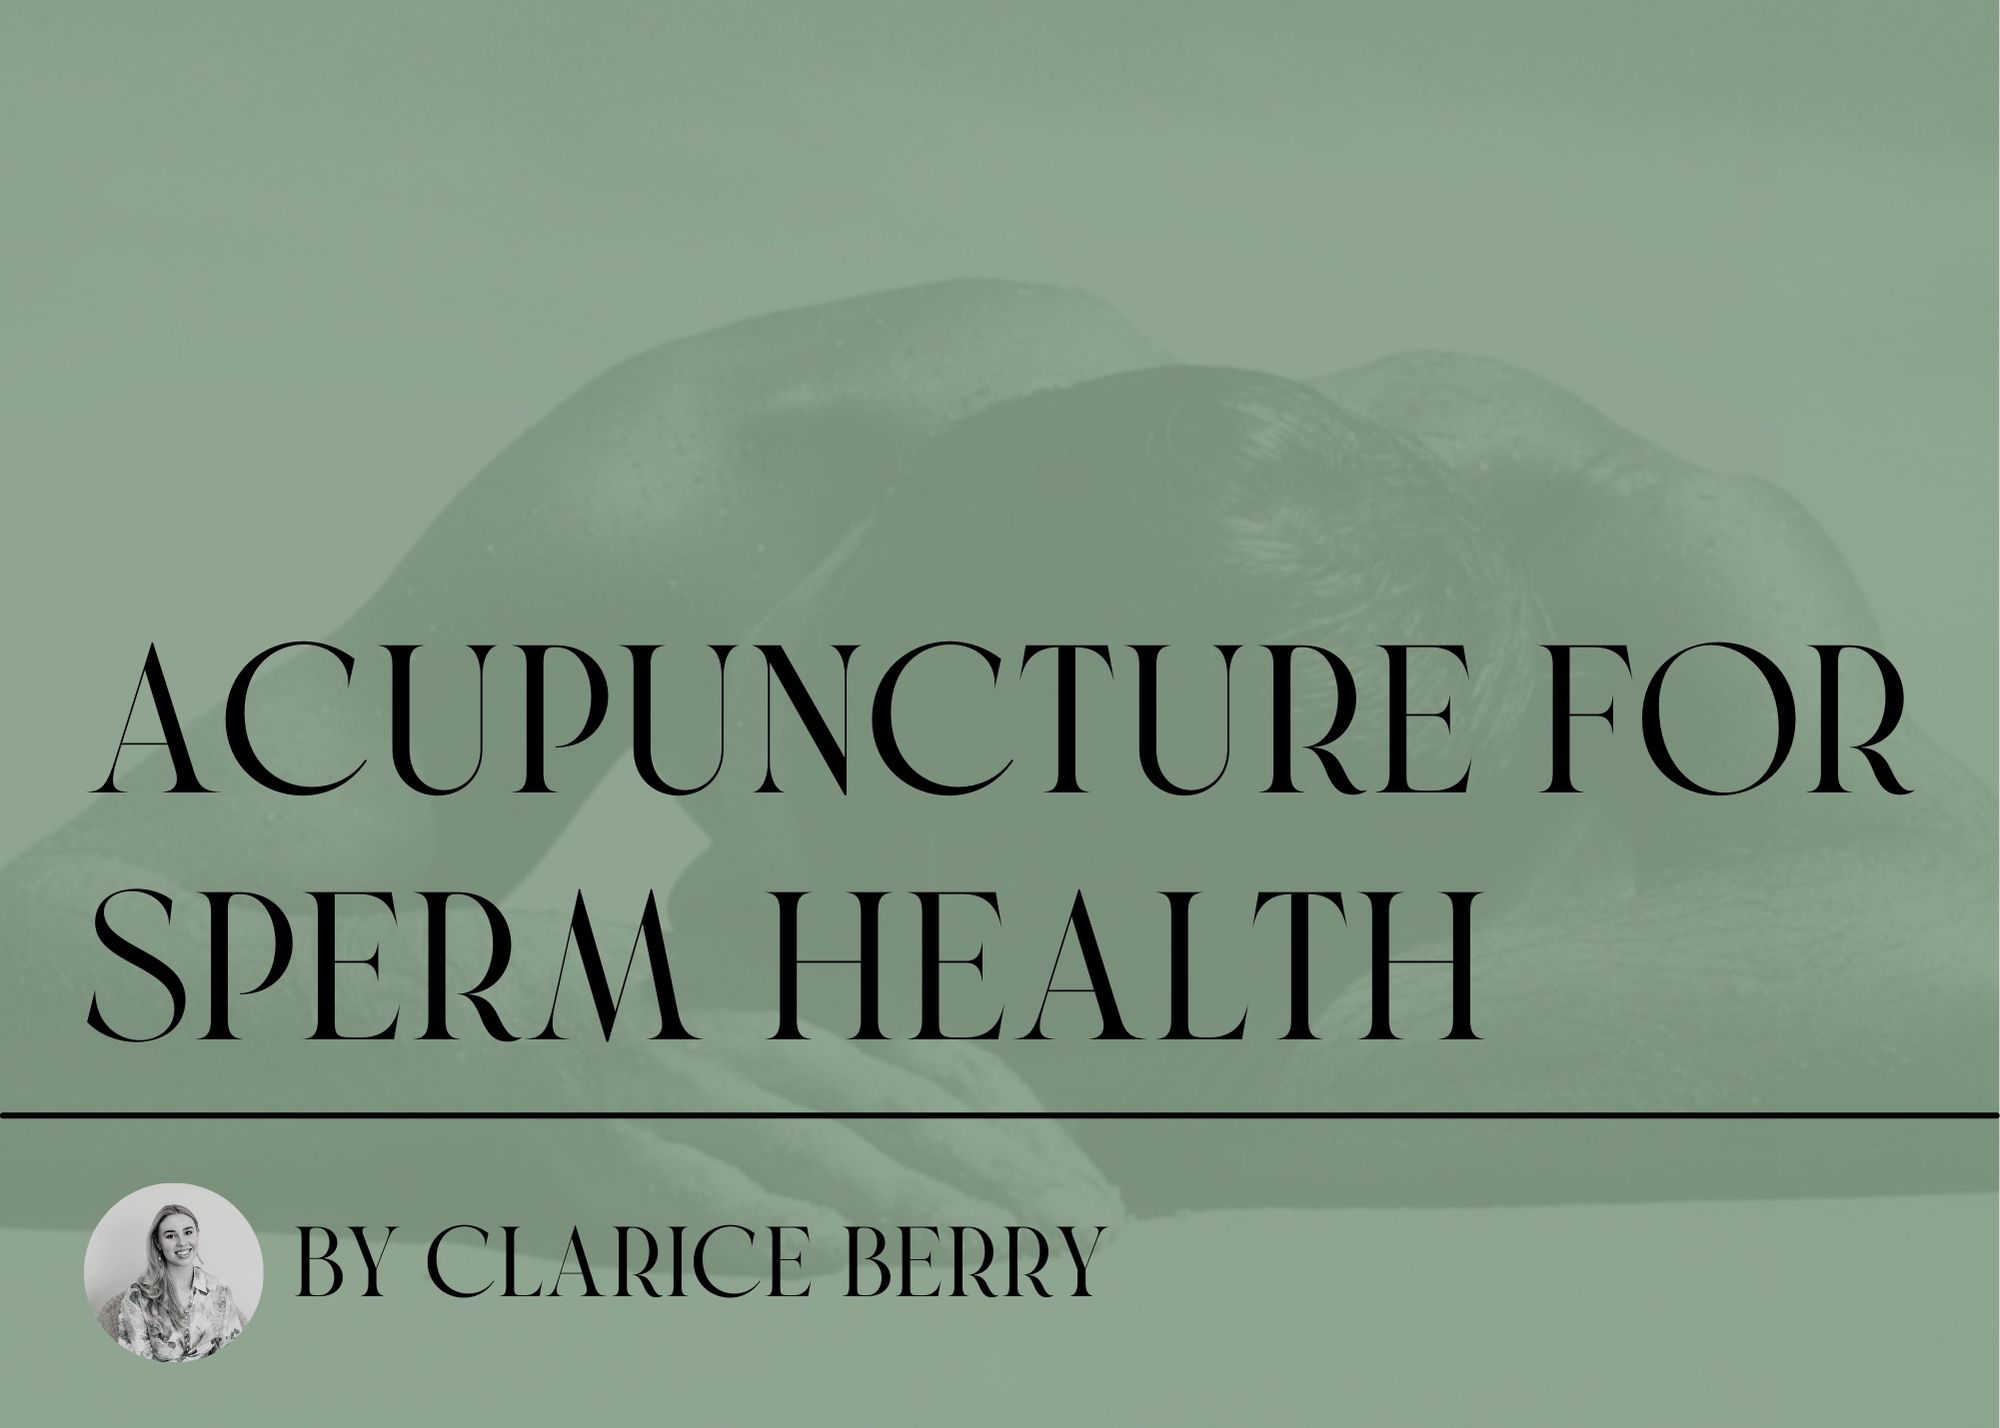 How does Acupuncture support Sperm Health?